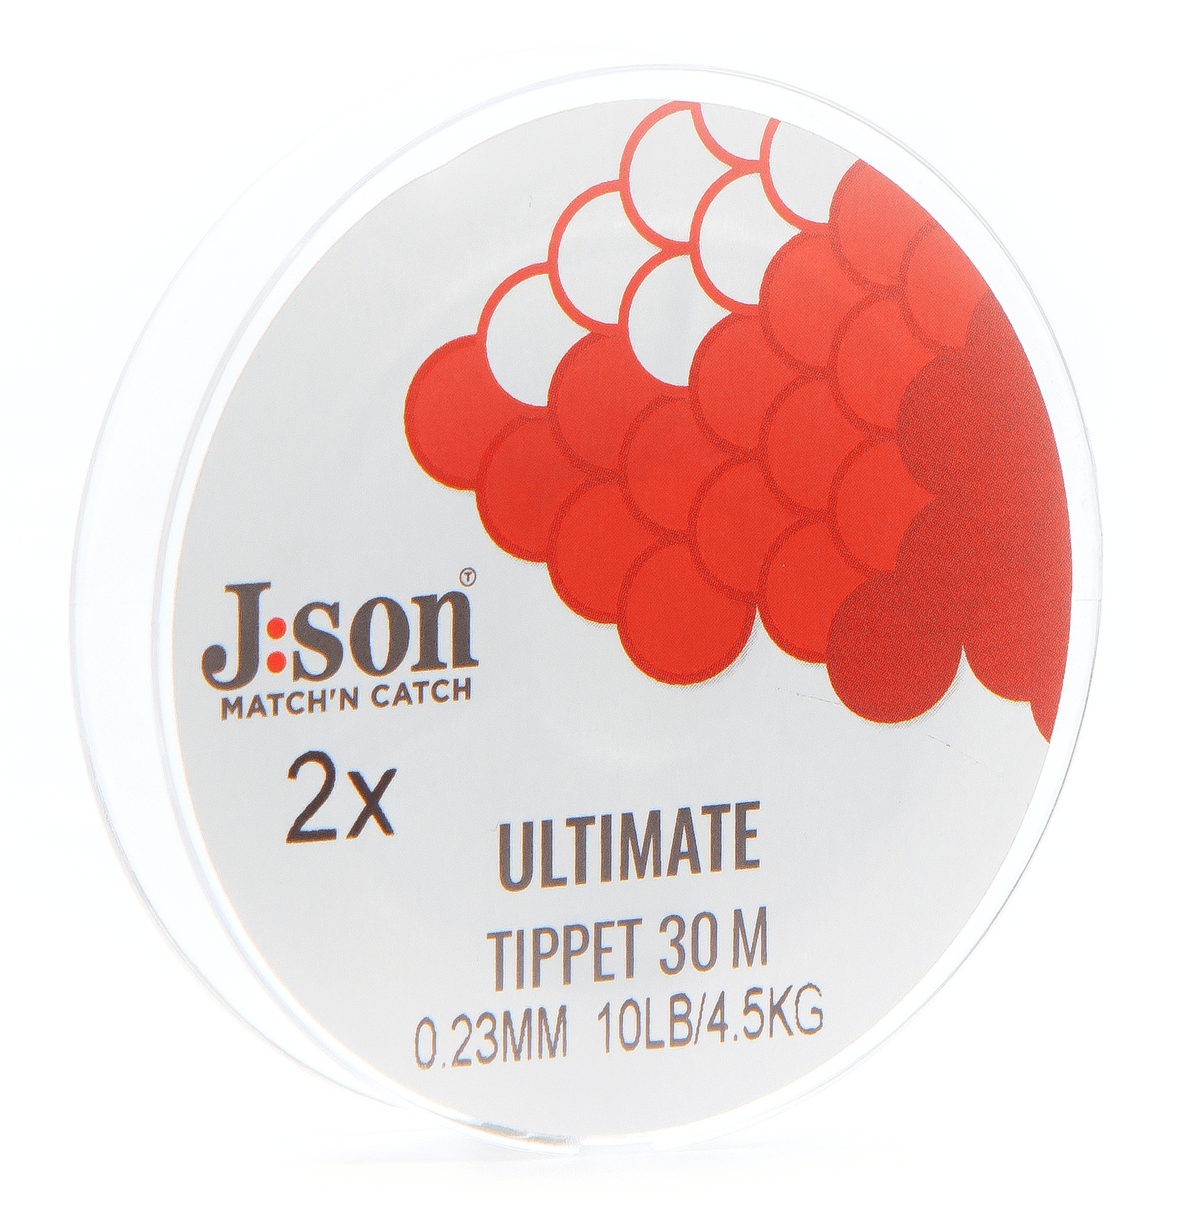 J:son Ultimate Tippet - Tippetmaterial 30m_1